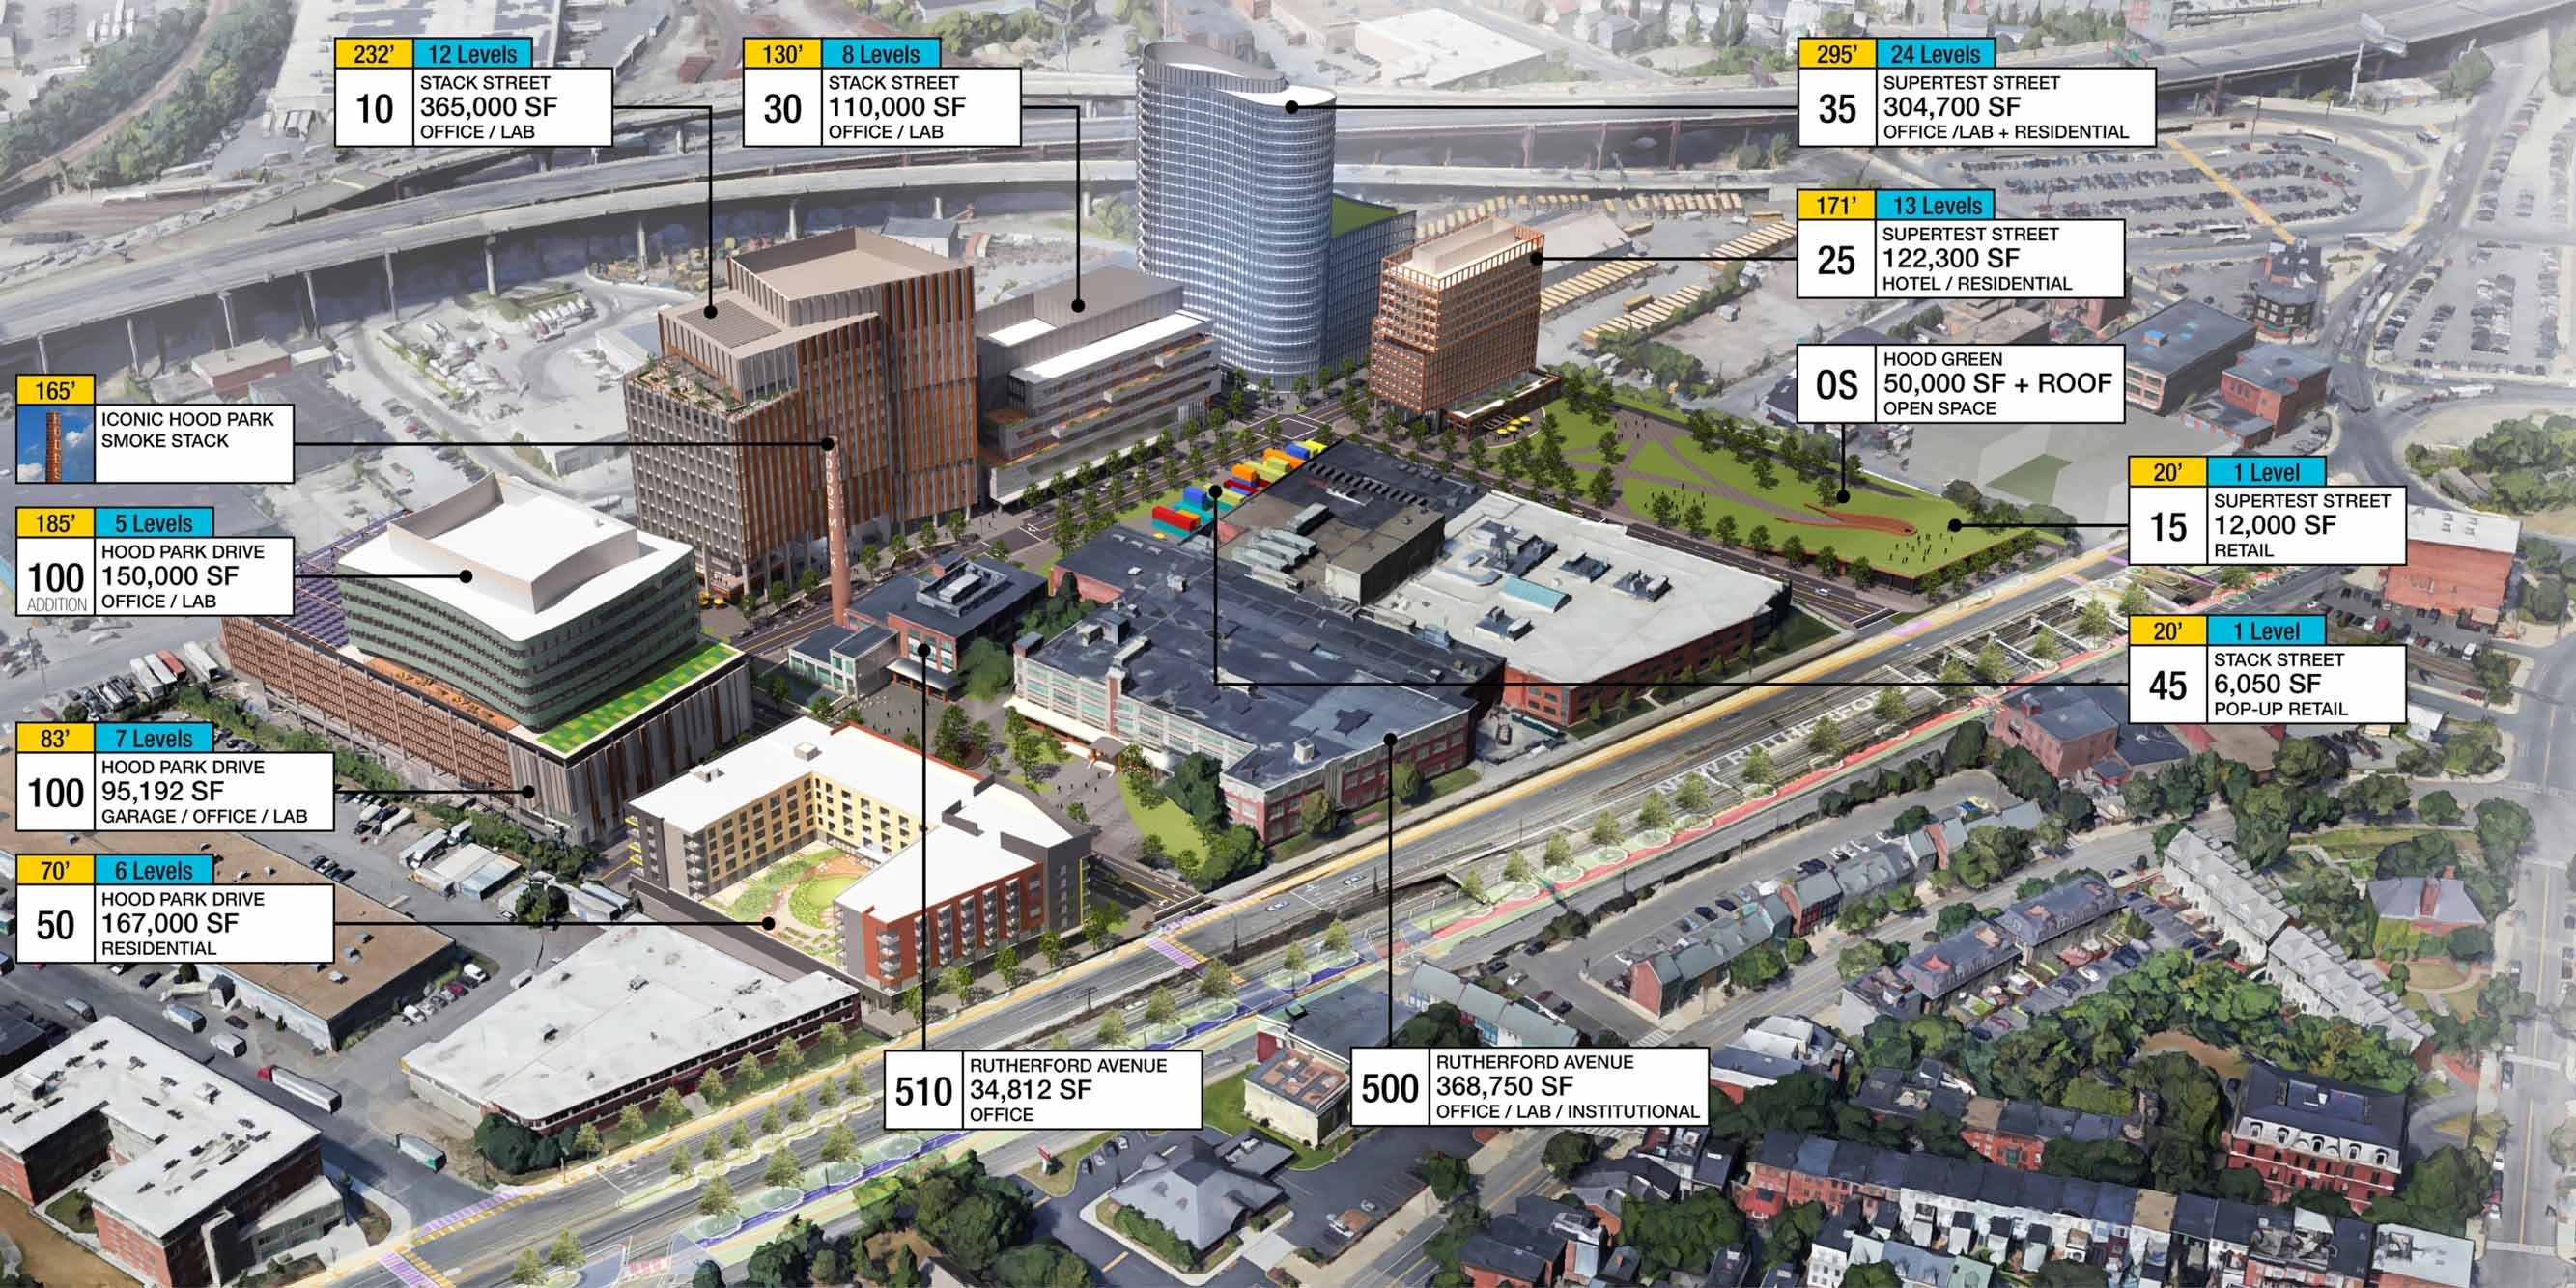 Annotated rendering of full Hood Park Master Plan site in Charlestown, MA